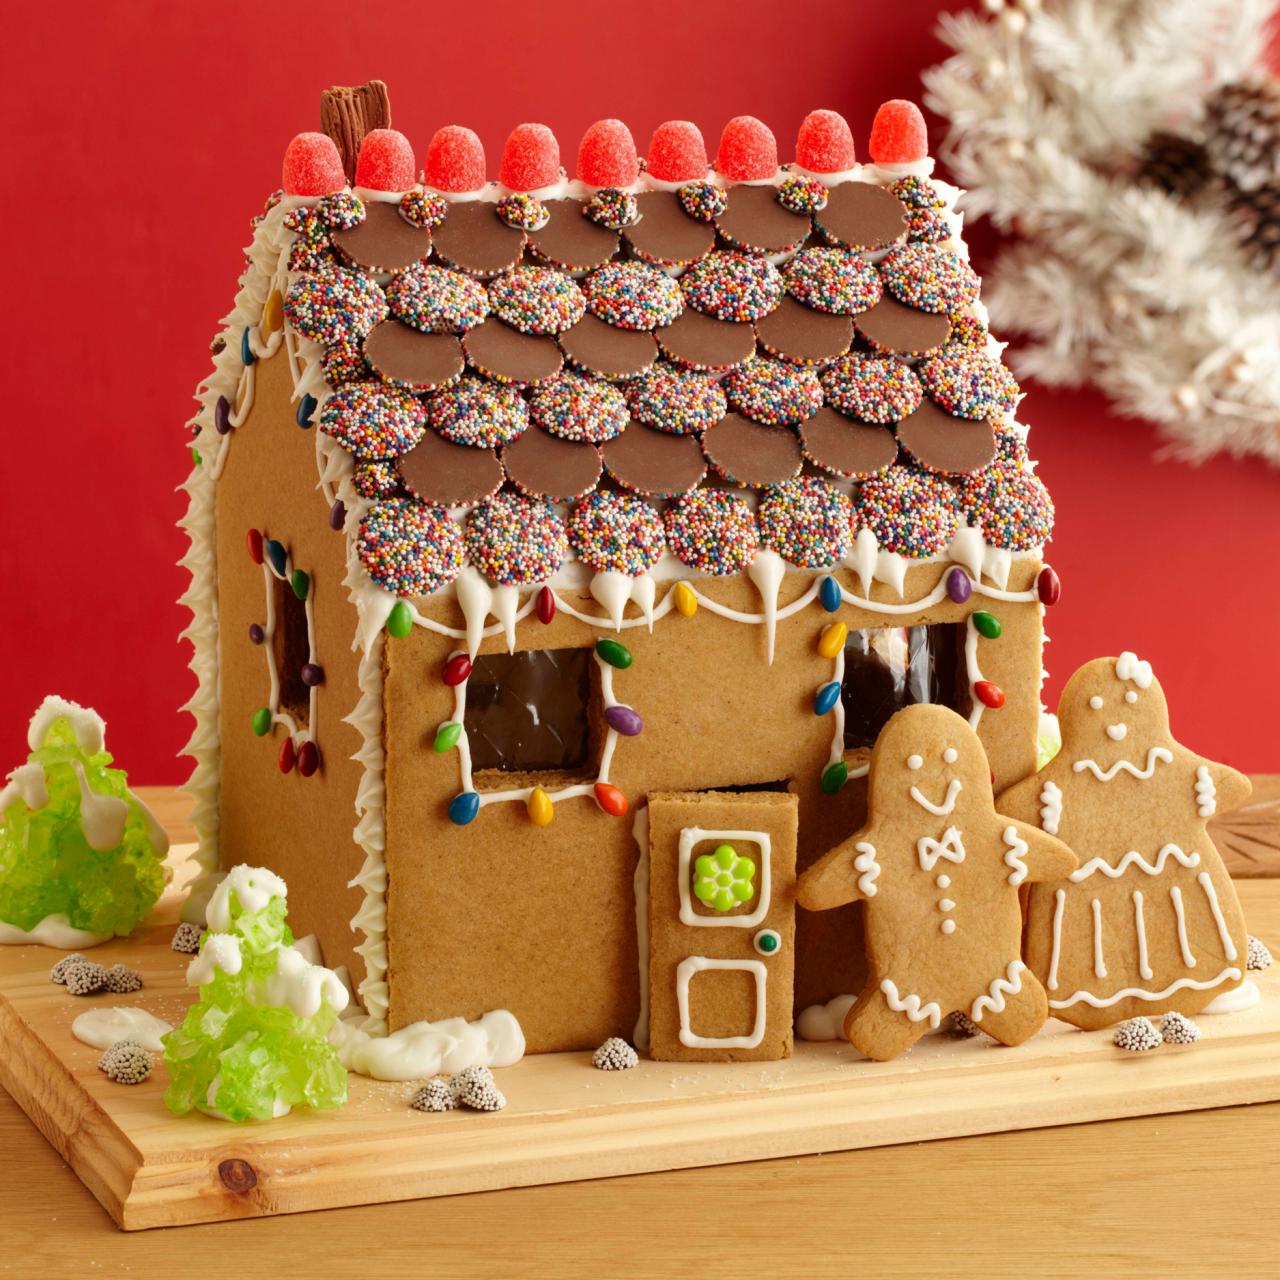 https://cook.fnr.sndimg.com/content/dam/images/cook/fullset/2012/9/5/1/CCRAB302_Gingerbread-House-and-People-Recipe_s4x3.jpg.rend.hgtvcom.1280.1280.suffix/1351635595903.jpeg